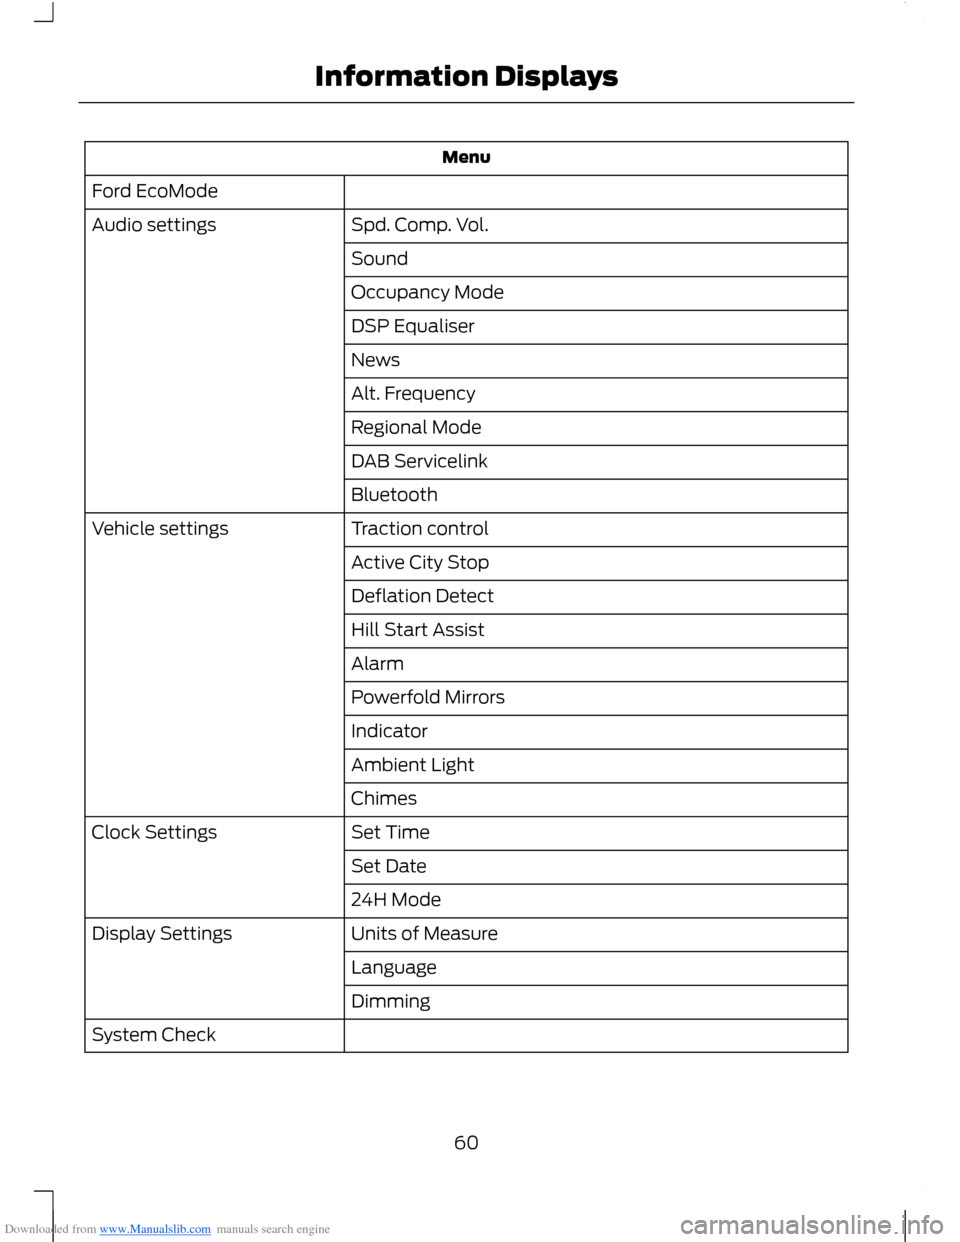 FORD B MAX 2012 1.G Repair Manual Downloaded from www.Manualslib.com manuals search engine Menu
Ford EcoMode
Spd. Comp. Vol.Audio settings
Sound
Occupancy Mode
DSP Equaliser
News
Alt. Frequency
Regional Mode
DAB Servicelink
Bluetooth
